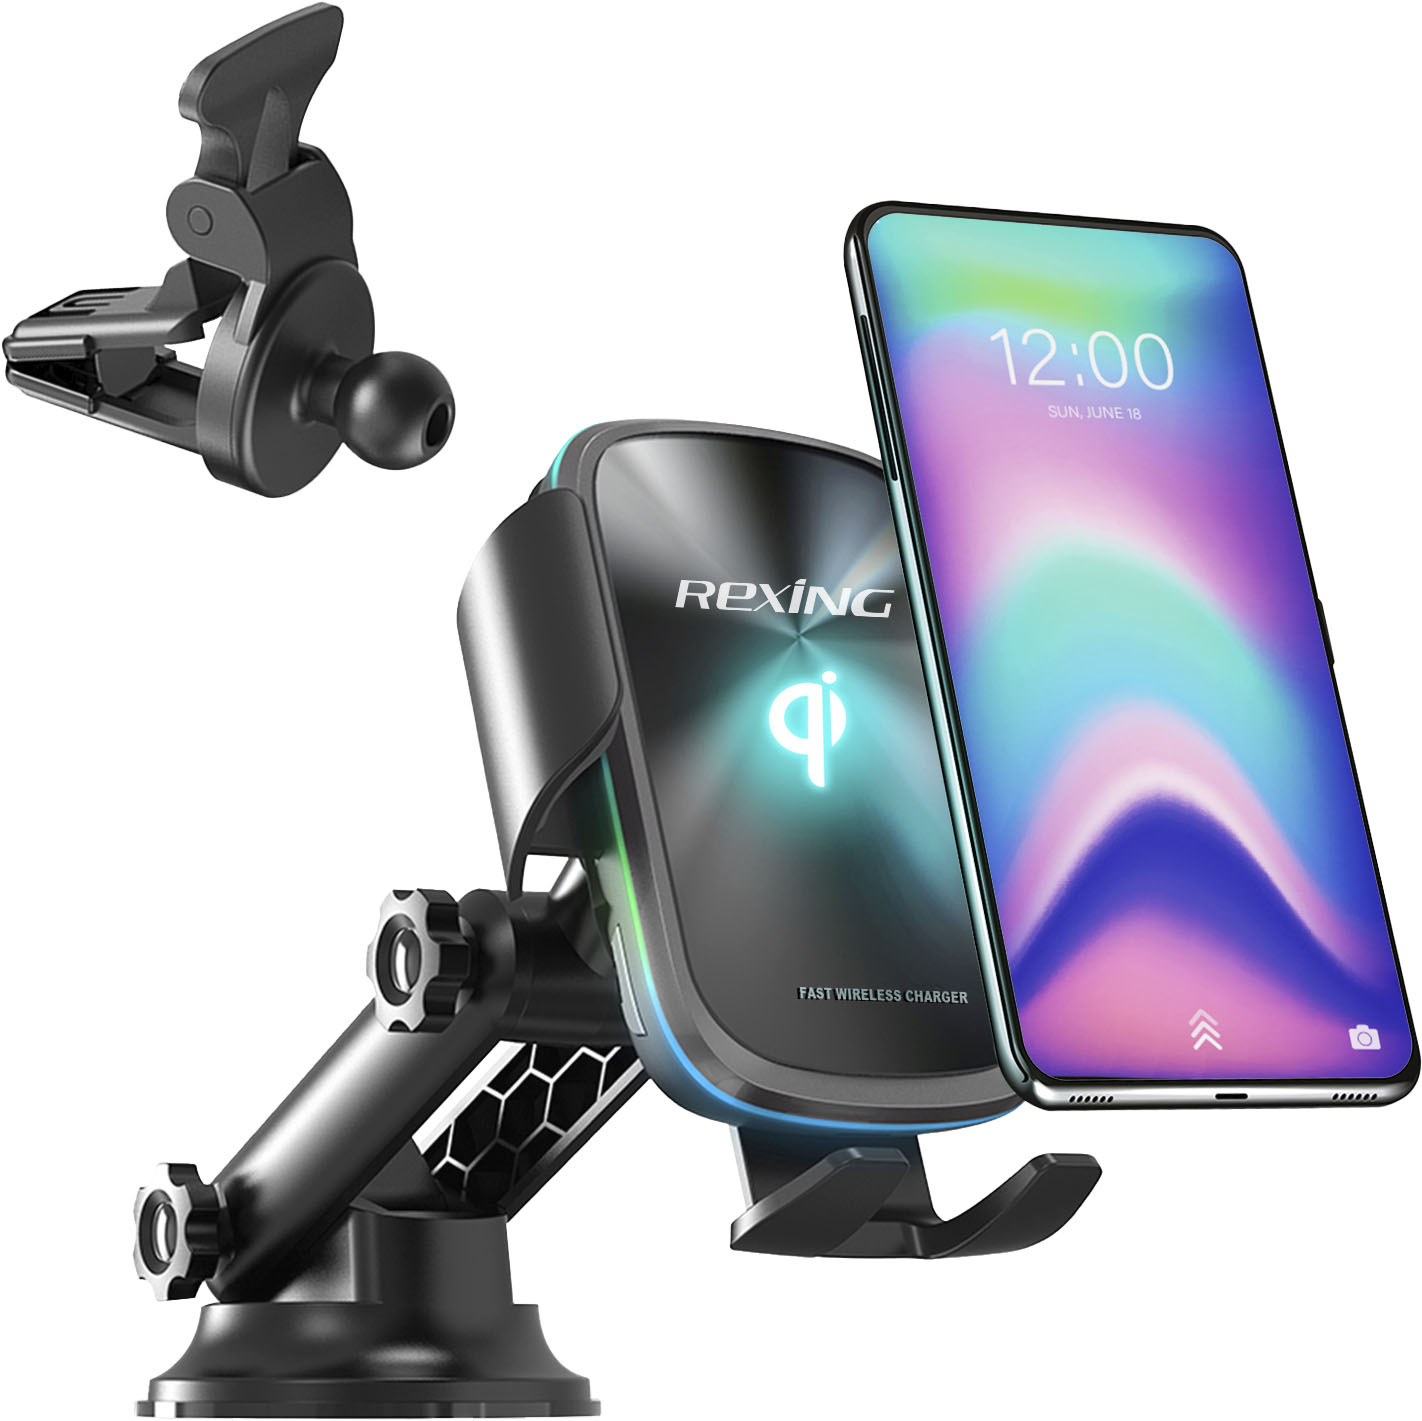 Koel Partina City Opgetild Rexing Motorized Wireless 15W/7.5W Qi Charging Car Mount for iPhone,  Android, Galaxy Smartphones Black BBYX5 - Best Buy